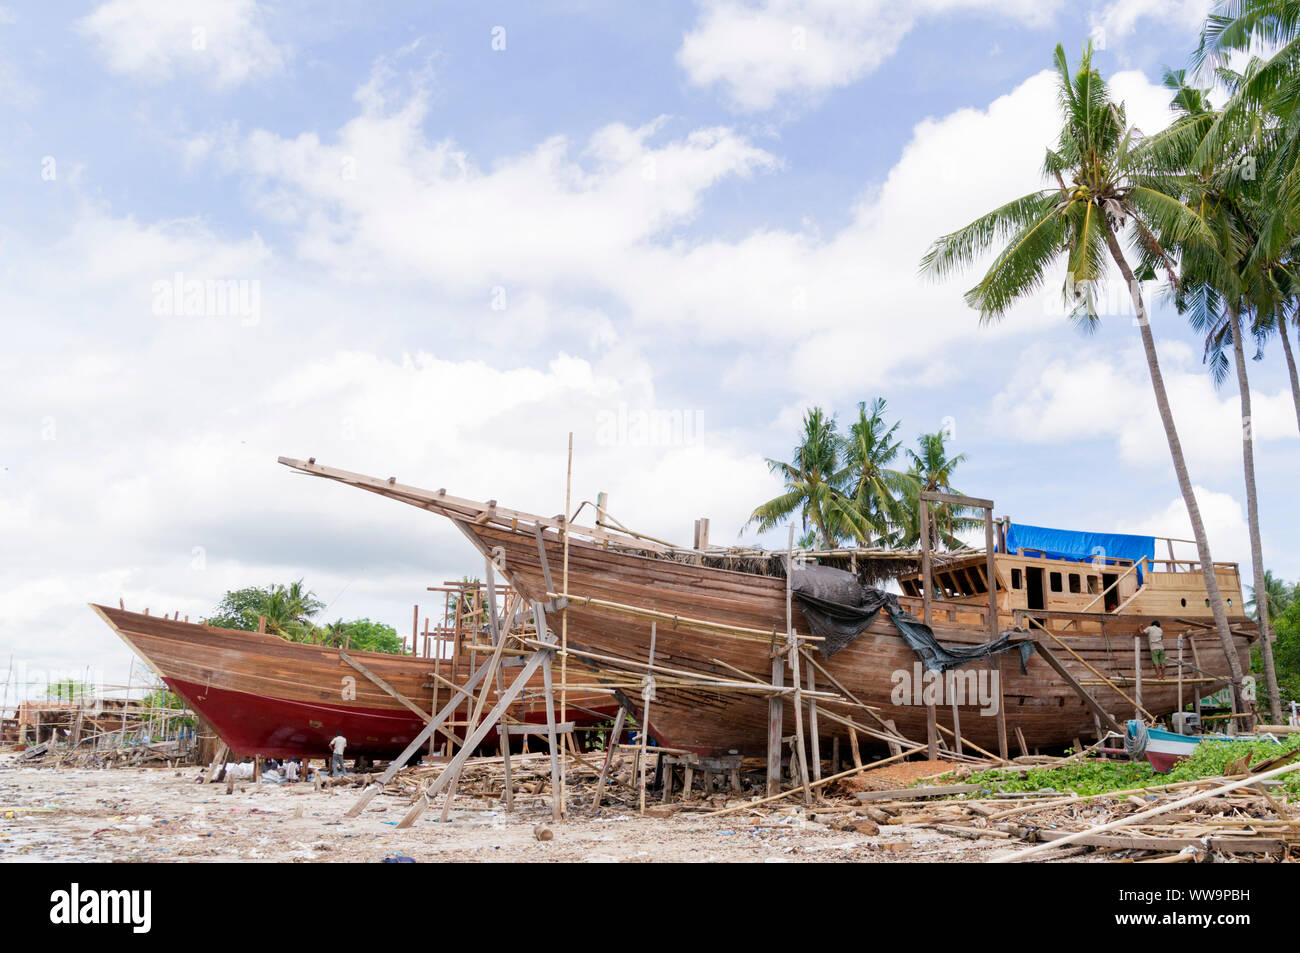 Traditional wooden boat being built at Bira, in South SUlawesi Stock Photo